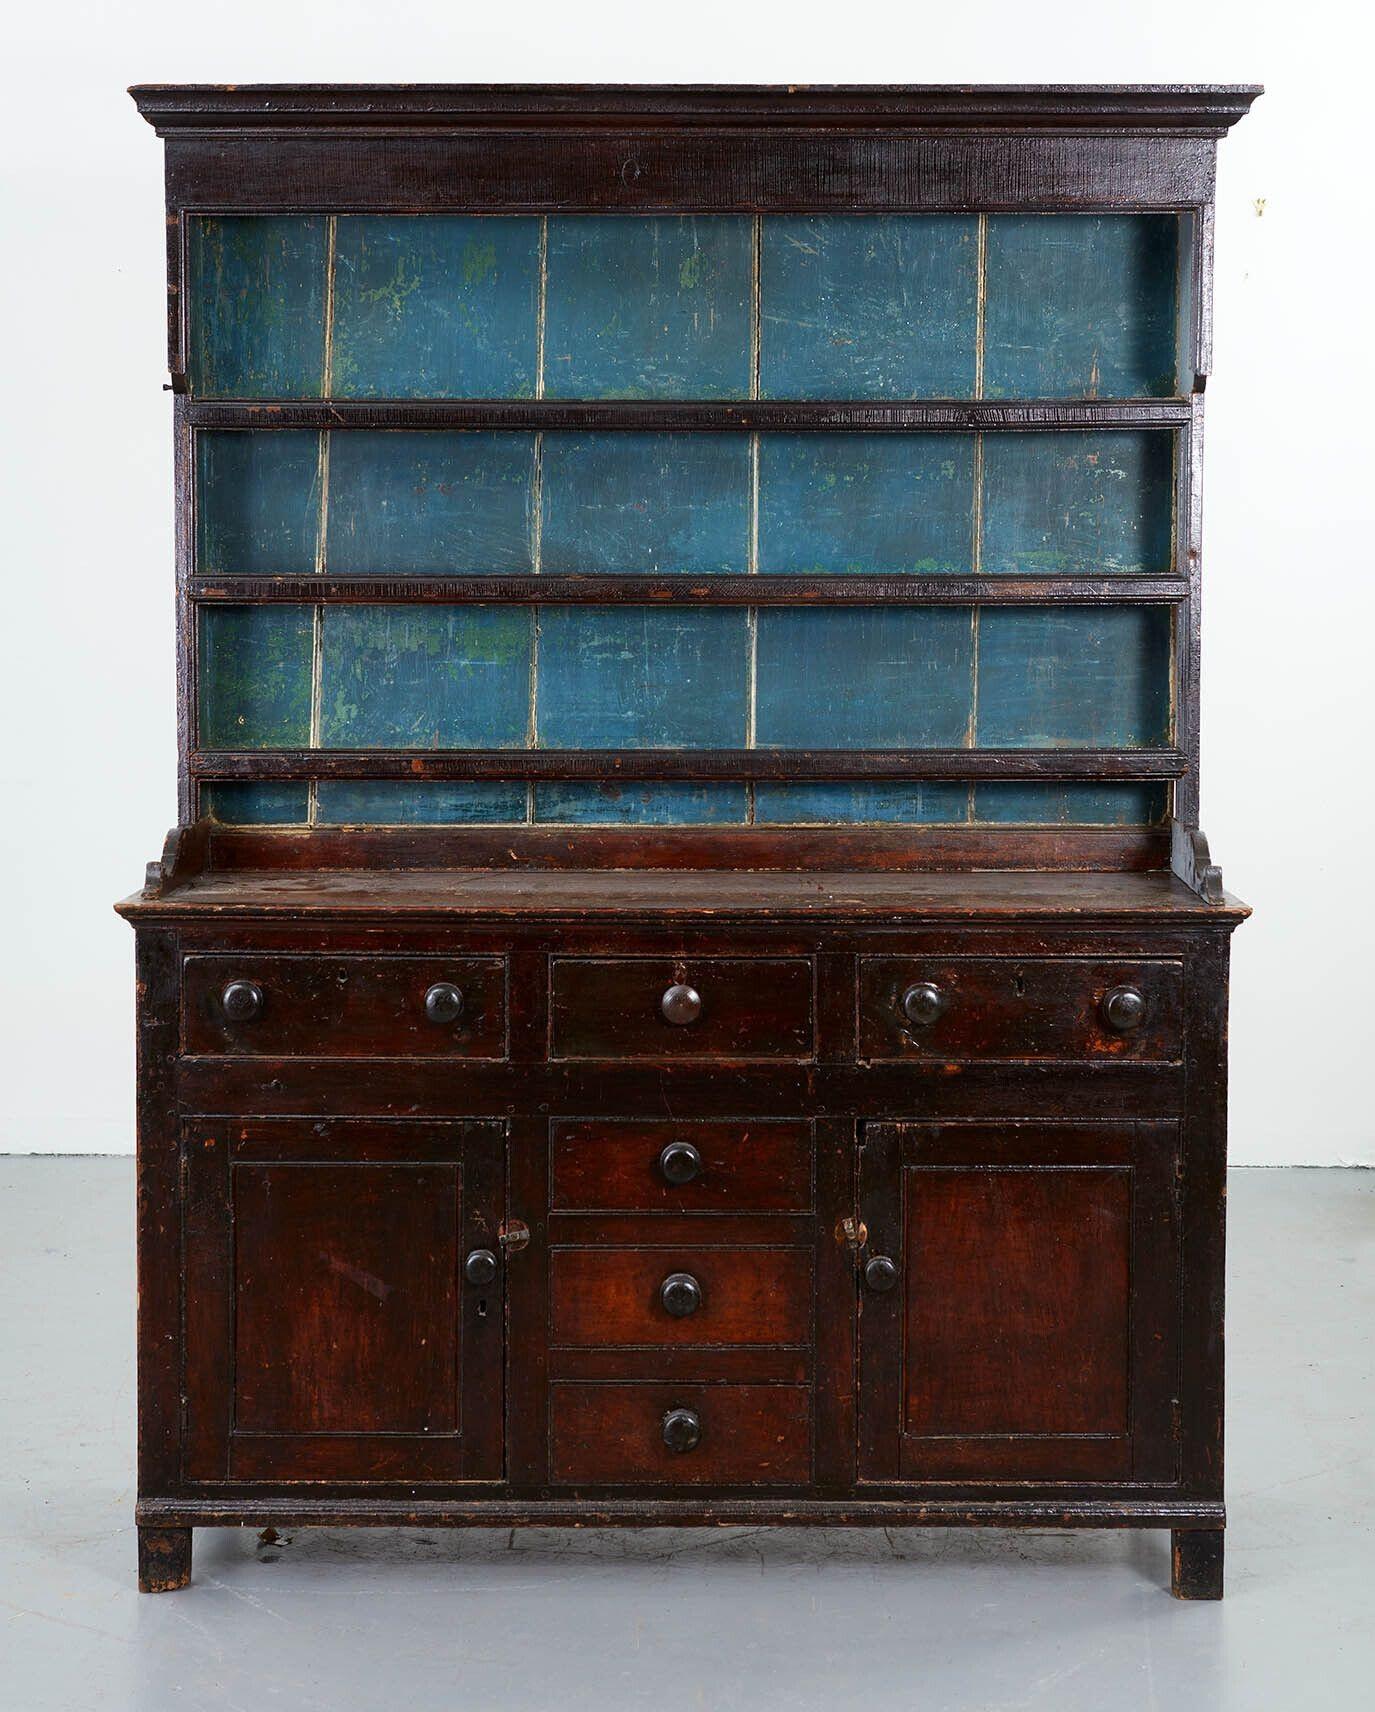 A very fine early 19th century English country dresser with cupboard and drawered base on stile legs and corniced rack above, supported on shaped brackets and still retaining original duck egg blue paint on interior of shelves and original scumble